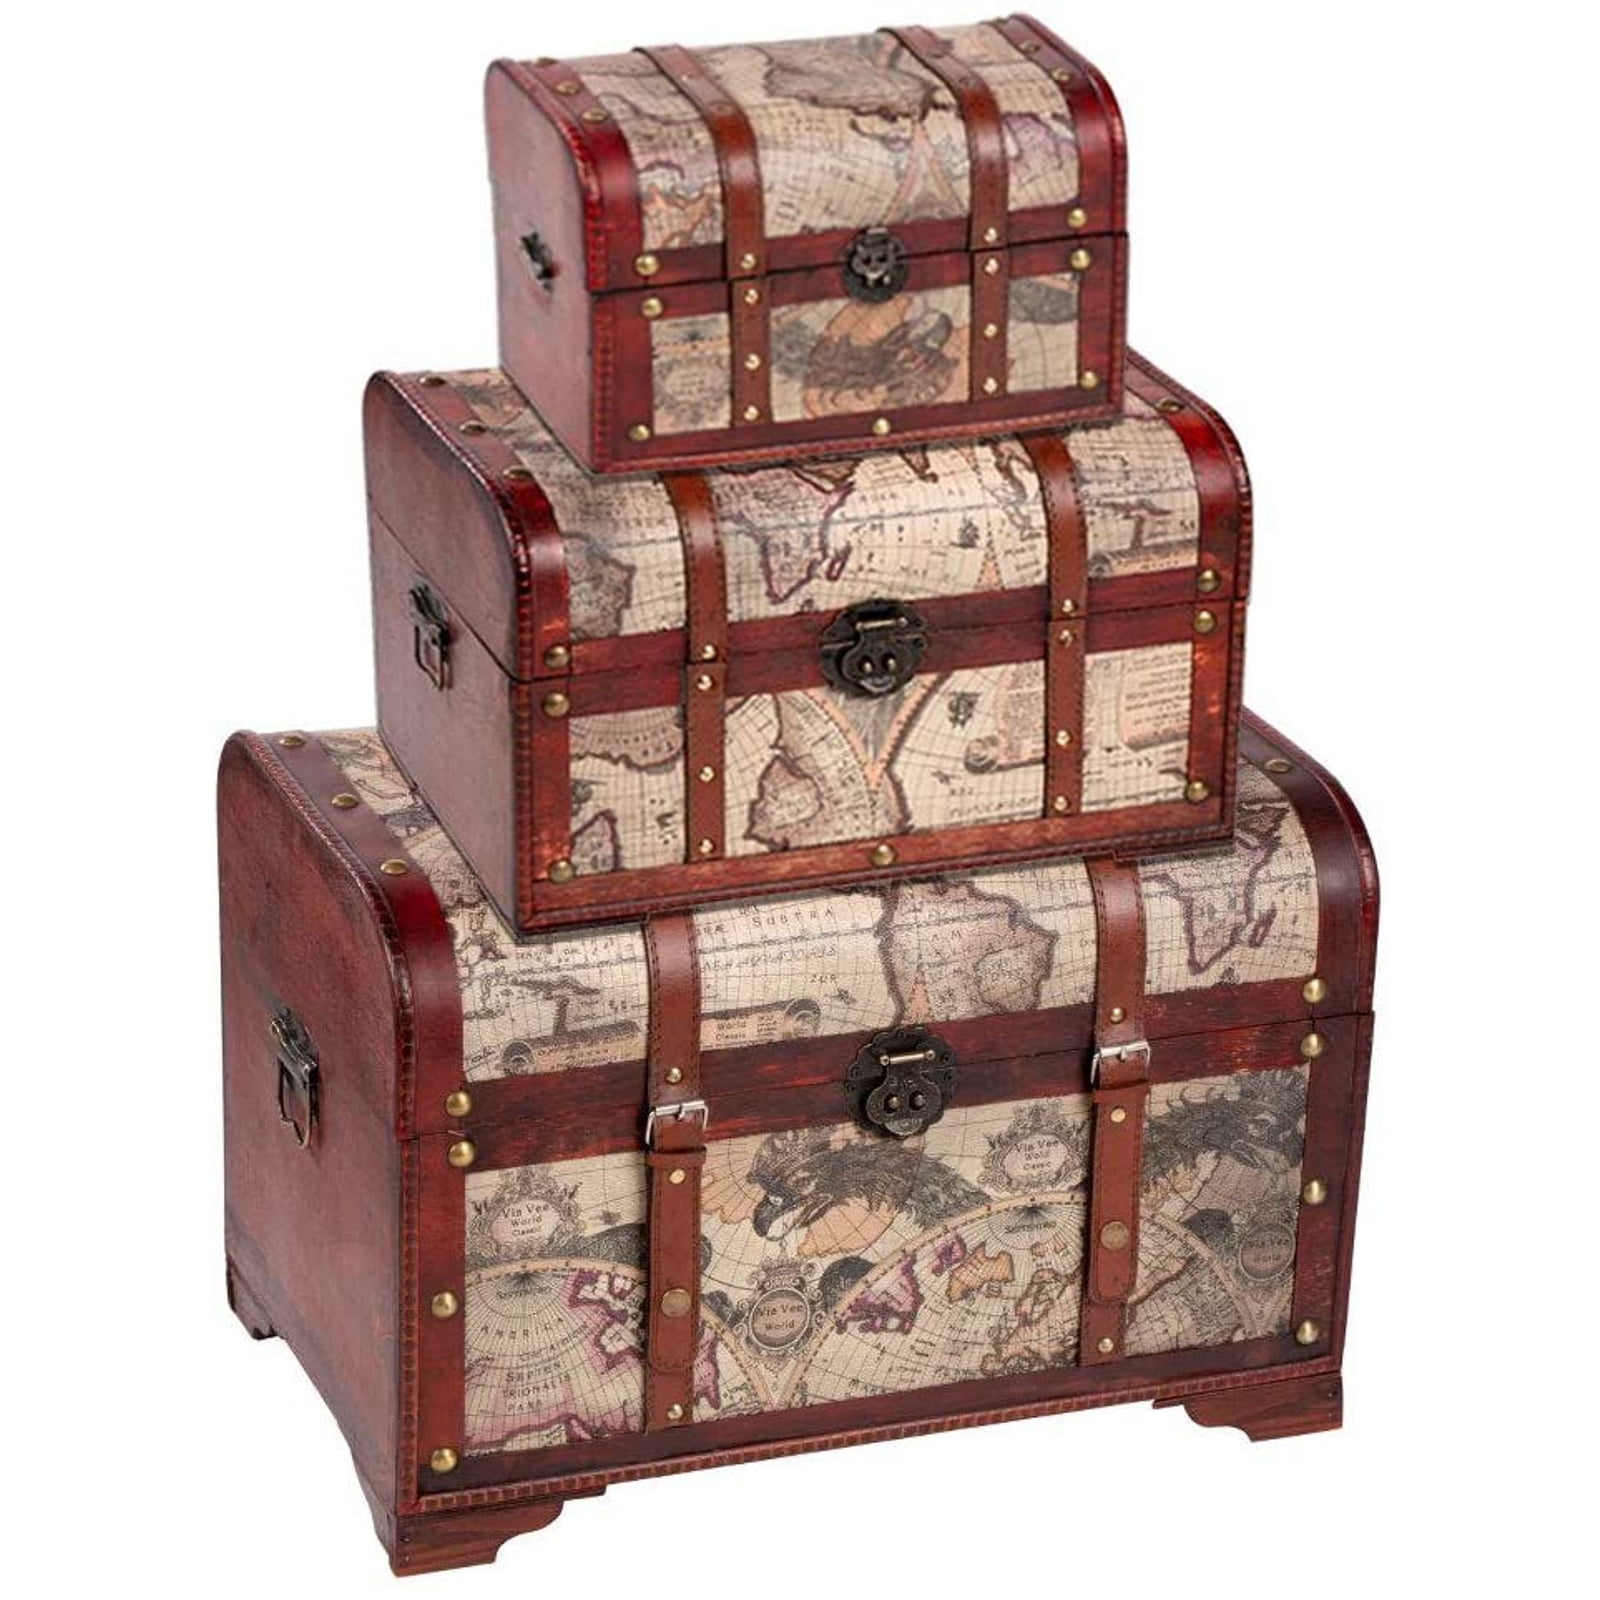 3Pcs Set Vintage Rustic Wooden Chest Storage Collection Box With Lid Gift Large 